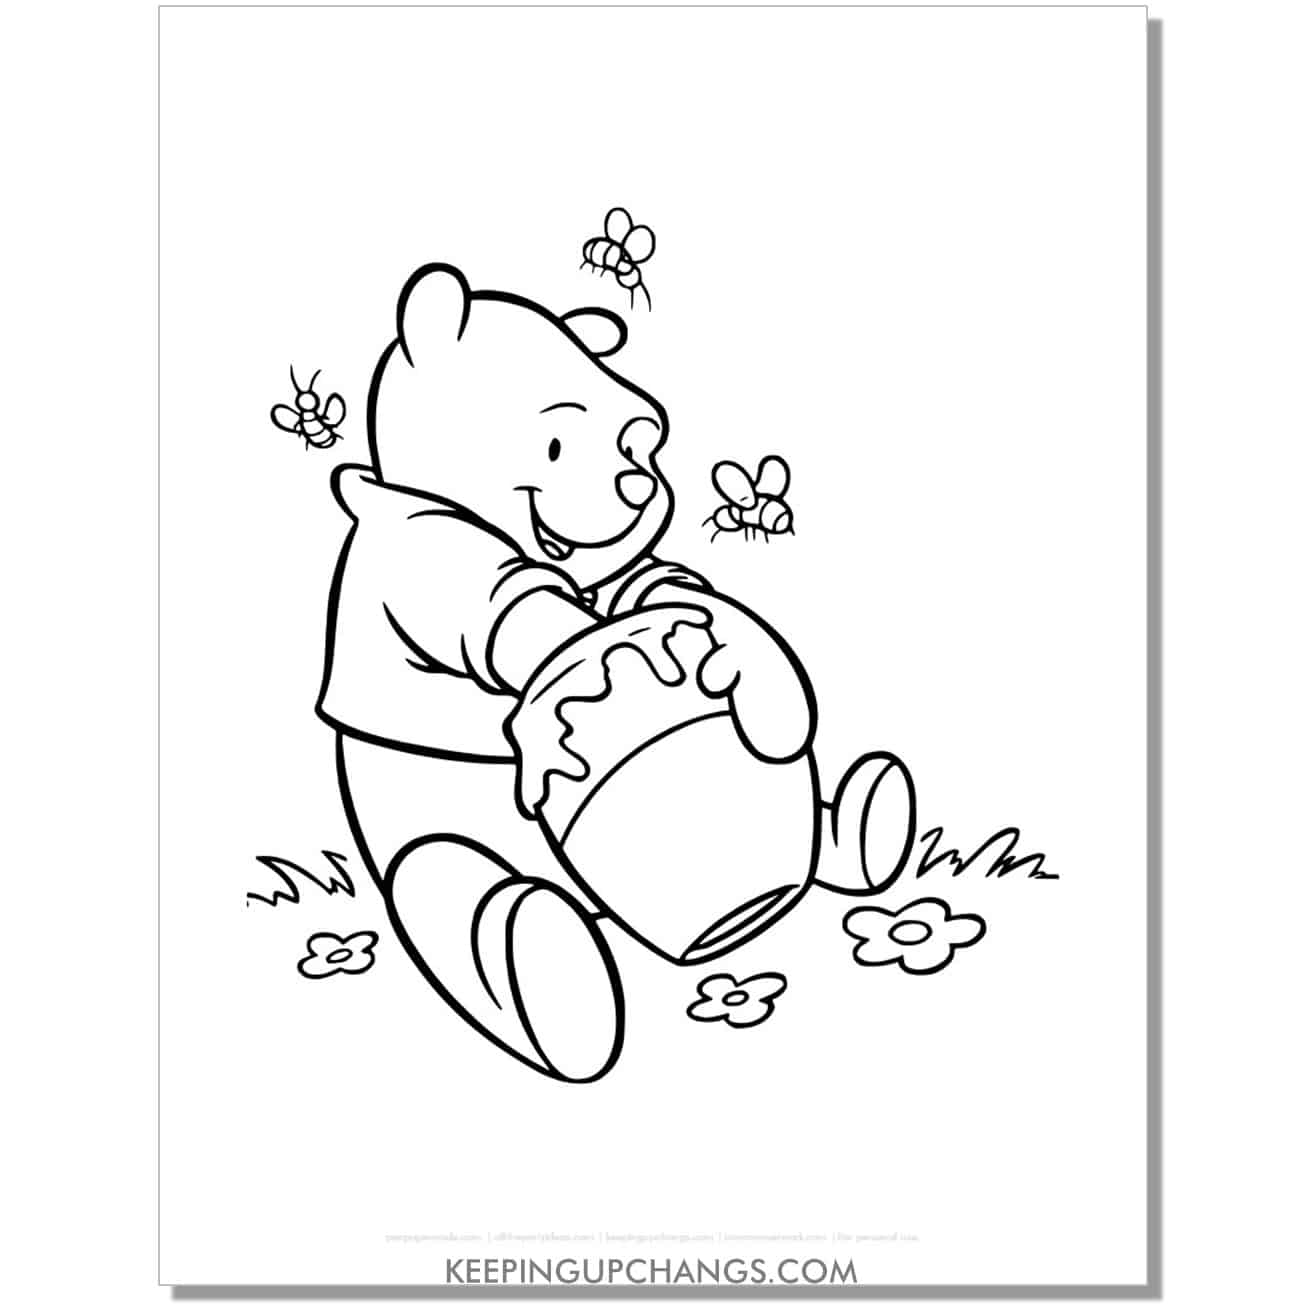 winnie the pooh with honey jar and bees coloring page, sheet.